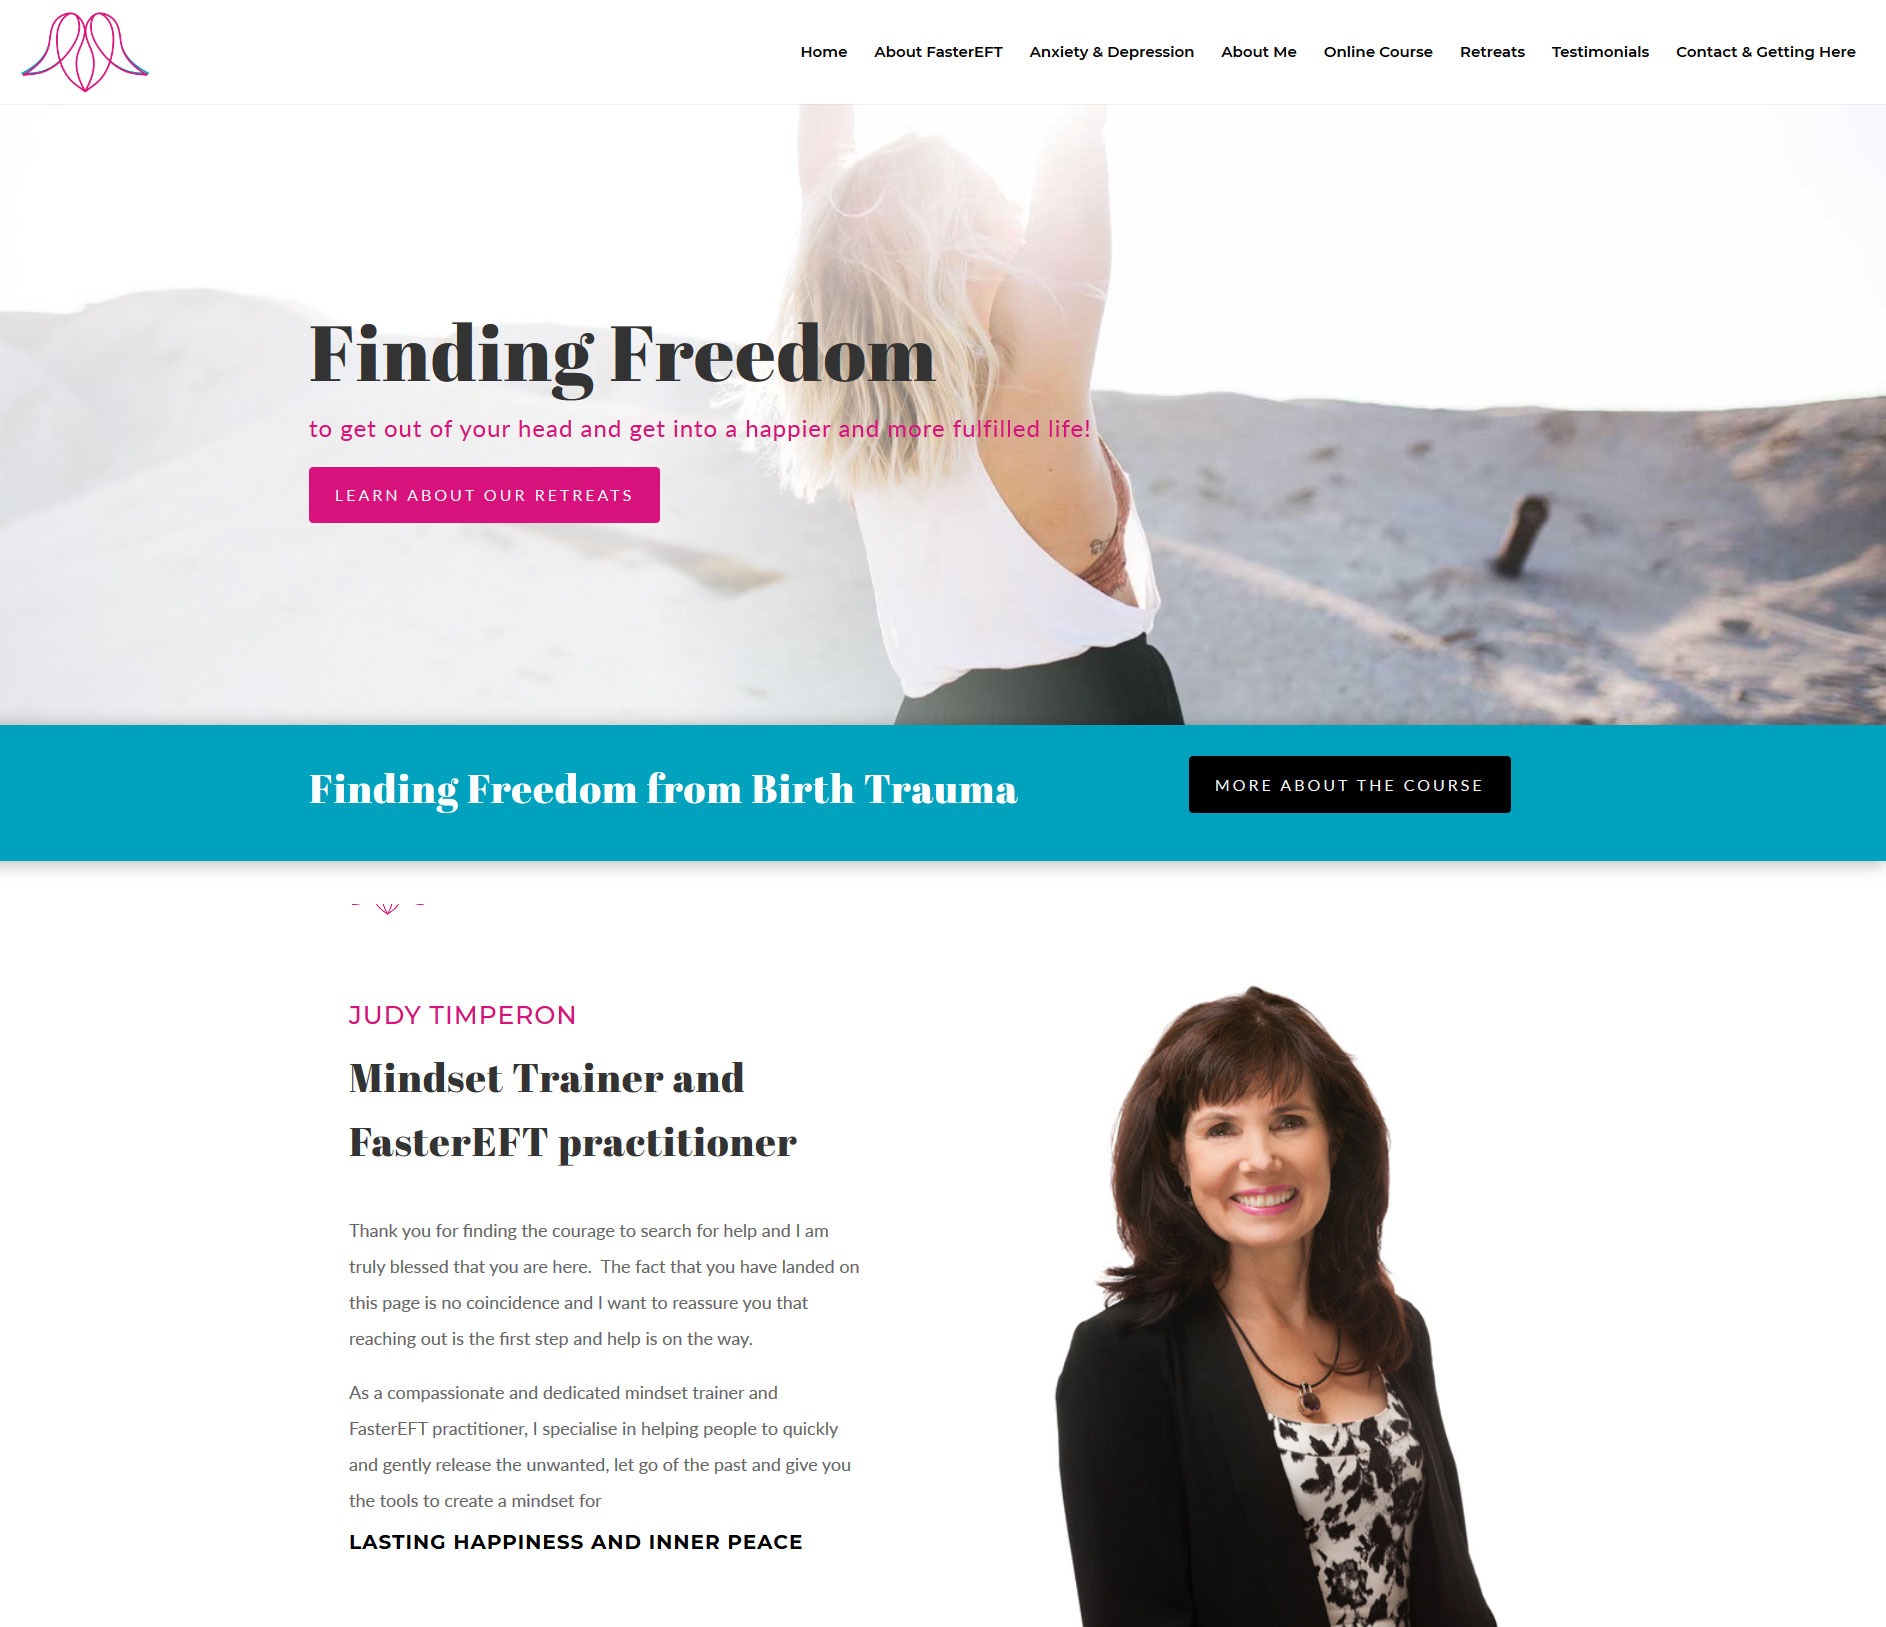 Website for Finding Freedom